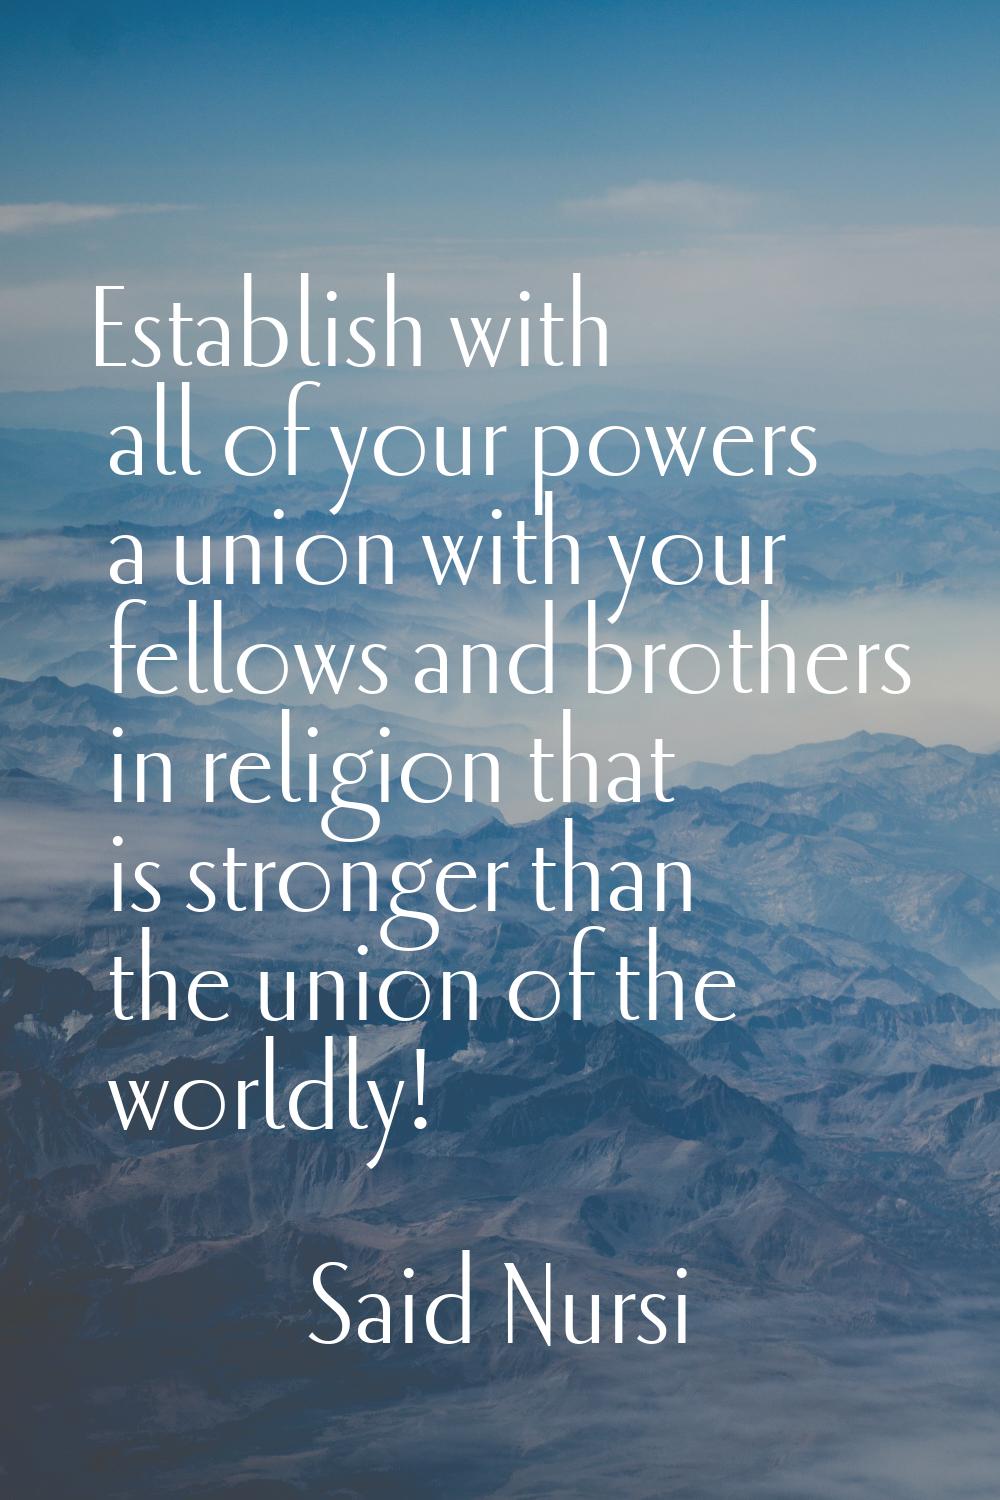 Establish with all of your powers a union with your fellows and brothers in religion that is strong